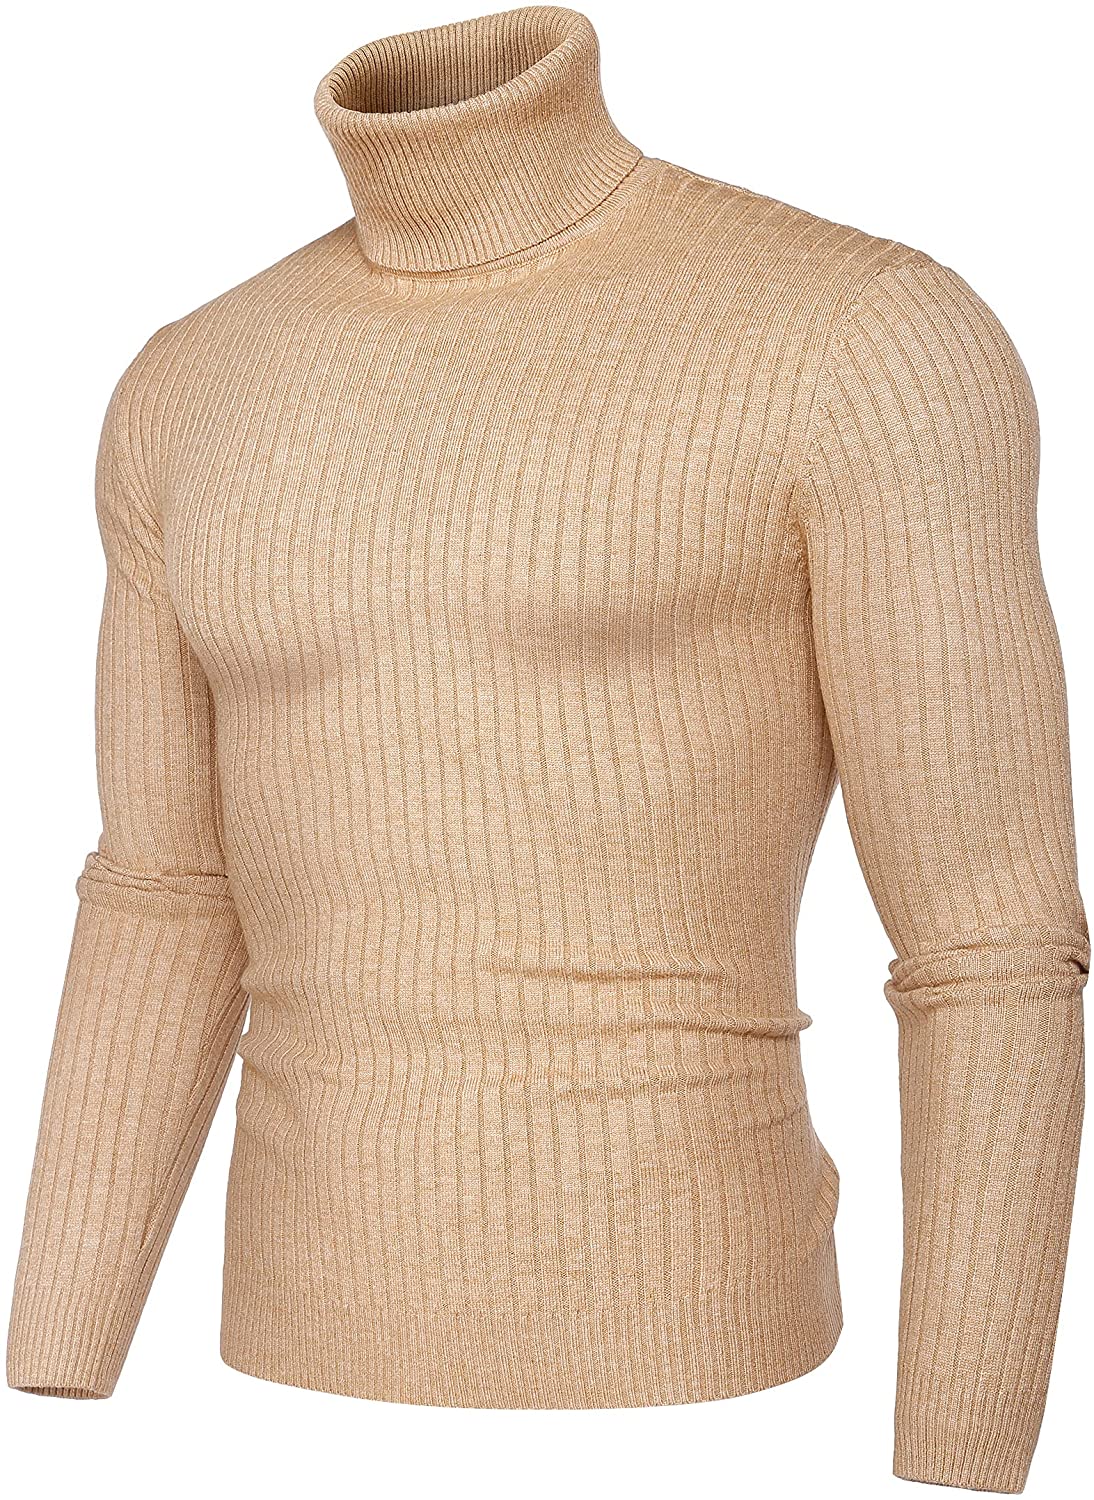 xiaohuoban Mens Fashion Turtleneck Pullover Sweater Knitted Slim Fit Sweater